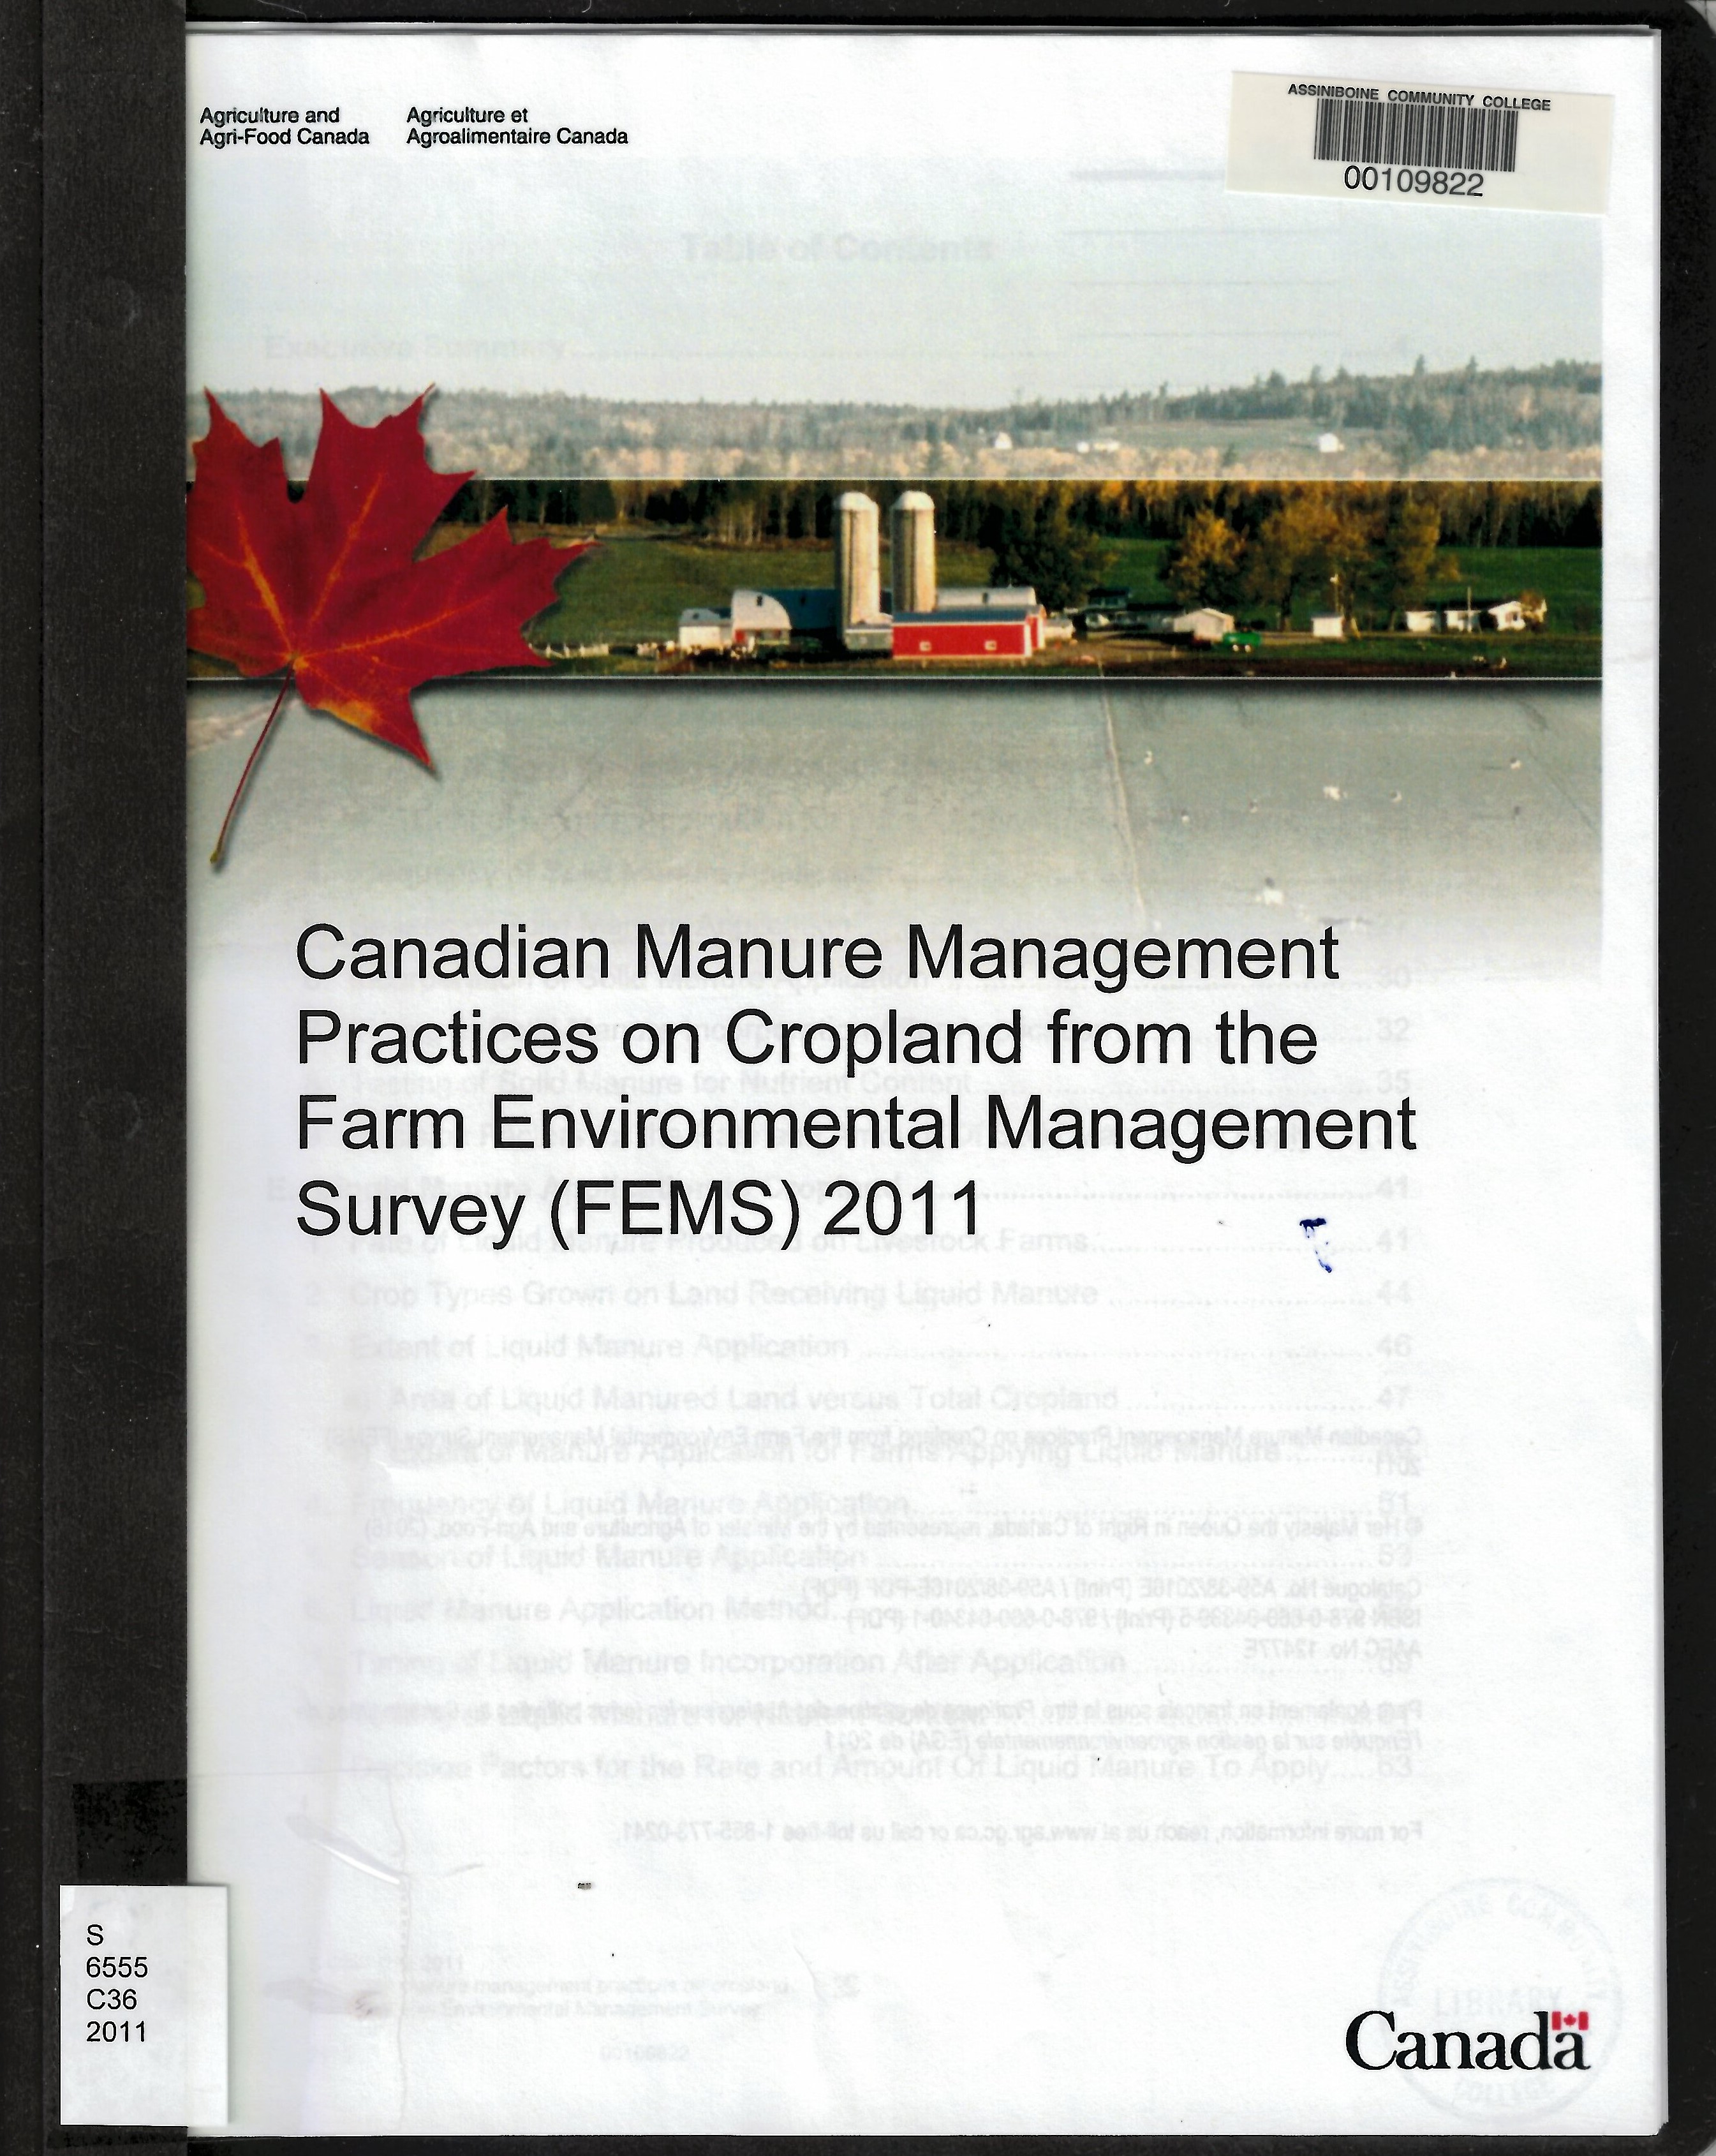 Canadian manure management practices on cropland from the Farm Environmental Management Survey (FEMS) 2011.